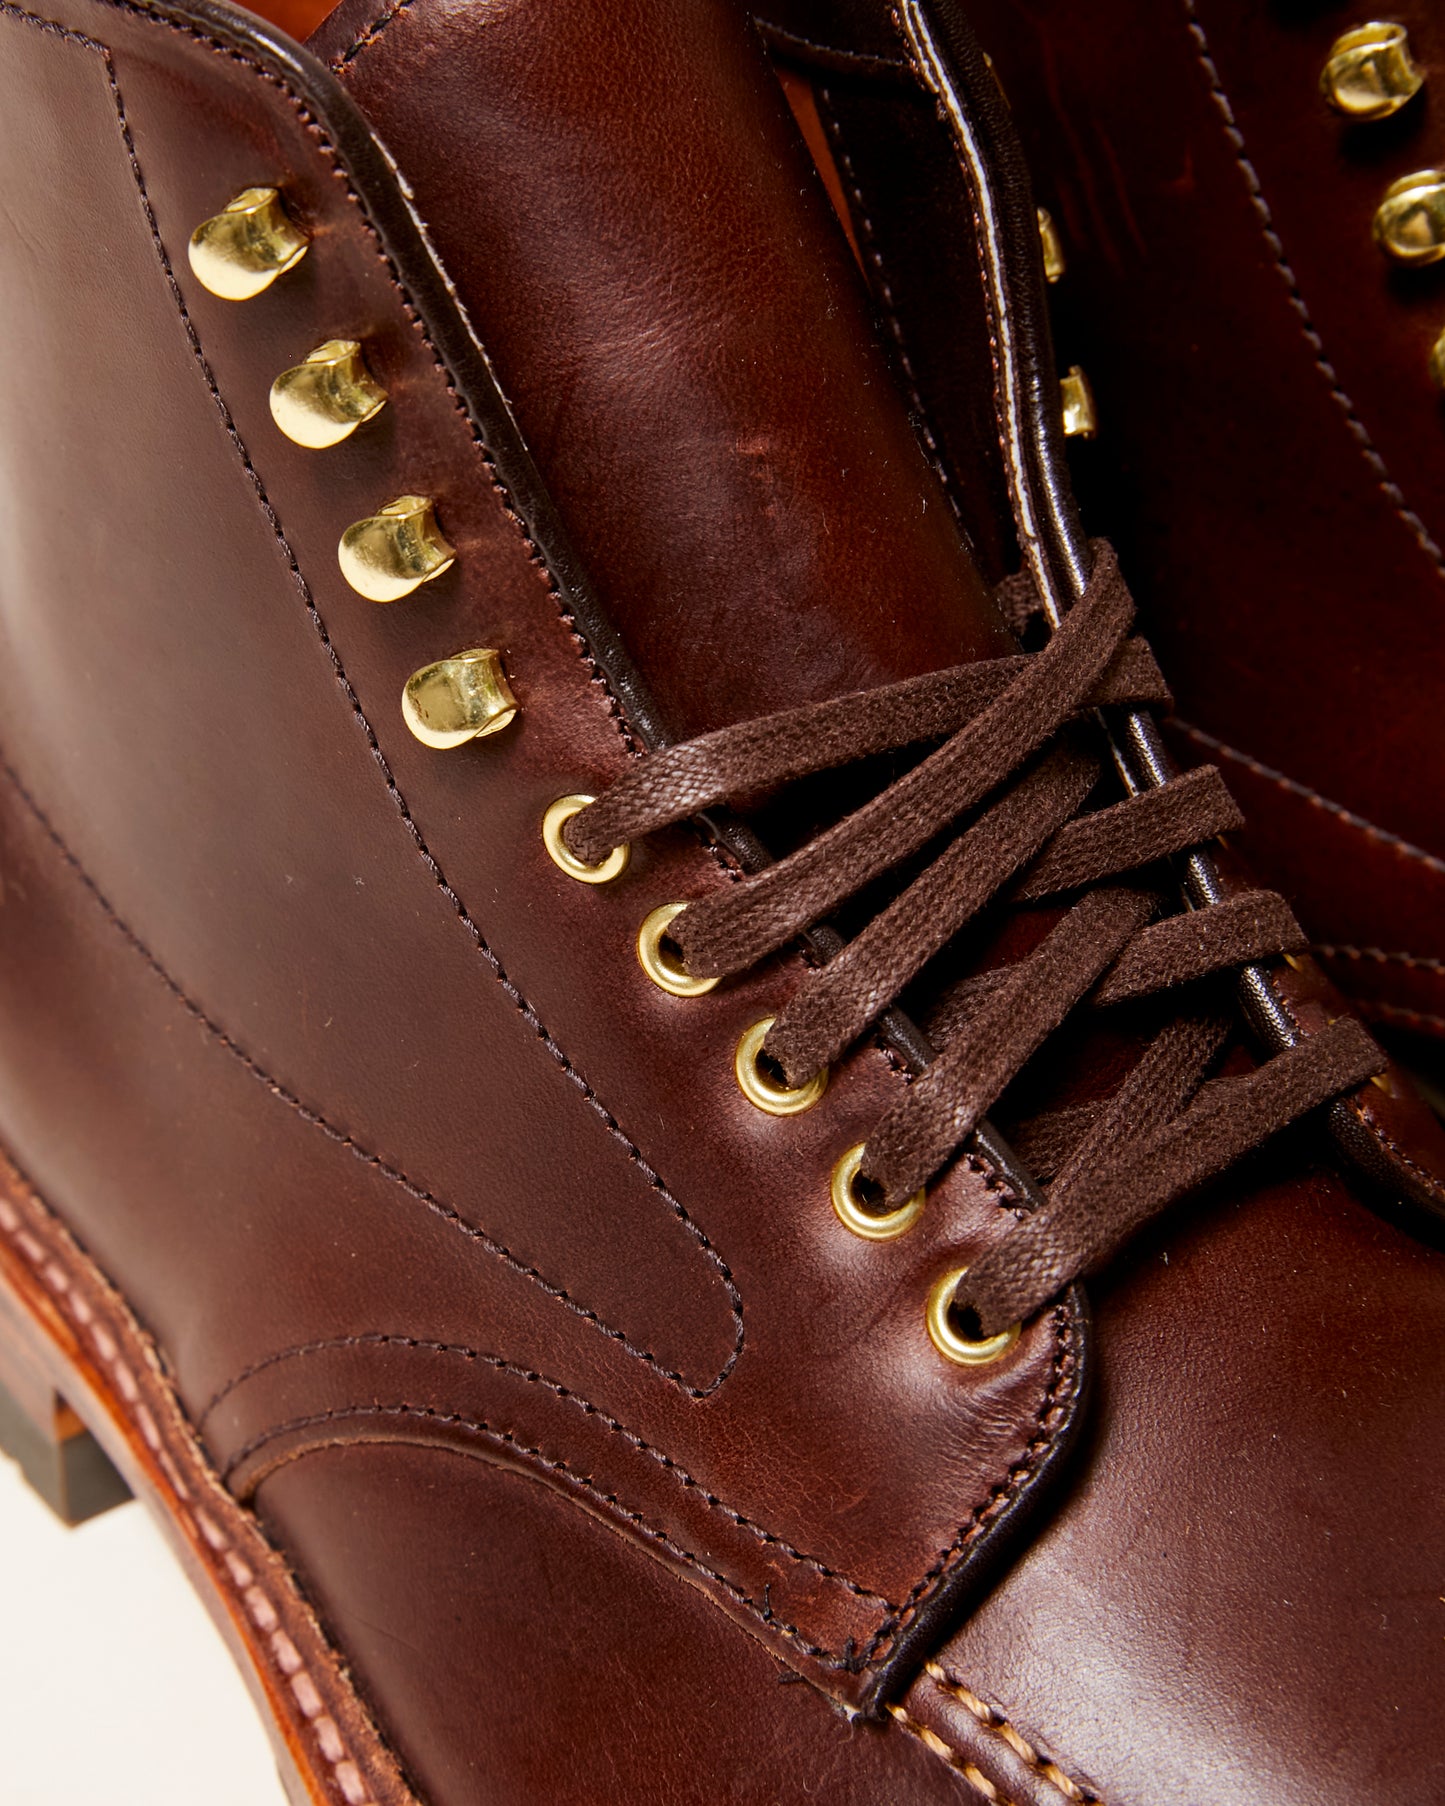 "Port Townsend" Brown Chromexcel Indy Boot